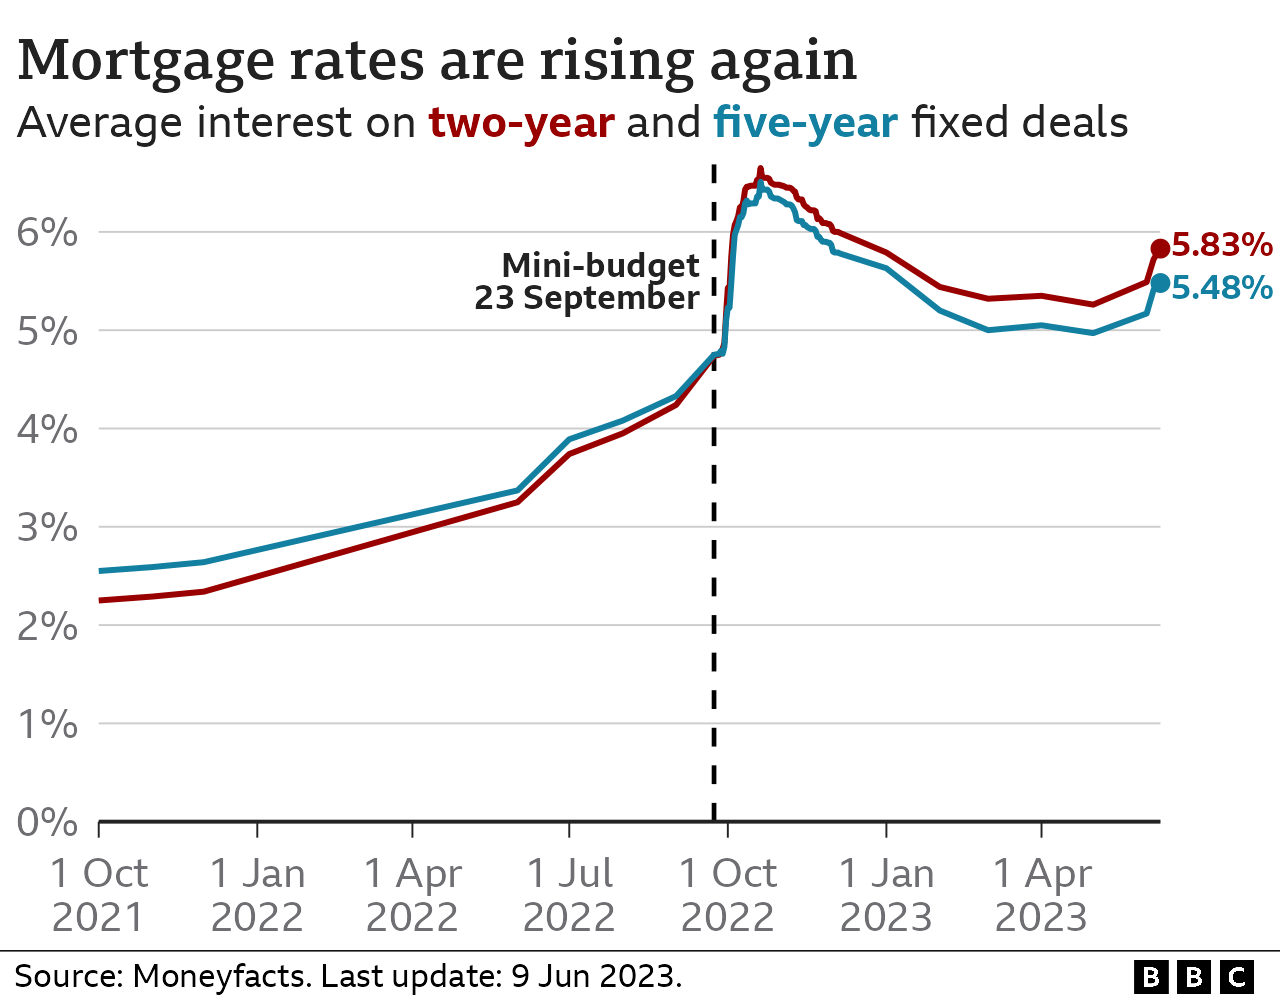 Line chart showing the average interest rate charged on two-year and five-year fixed deals. The two-year rate was 5.83% on 9 Jun 2023, and it peaked at 6.65% in October 2022. The five-year rate was 5.48%, and it peaked at 6.51%.